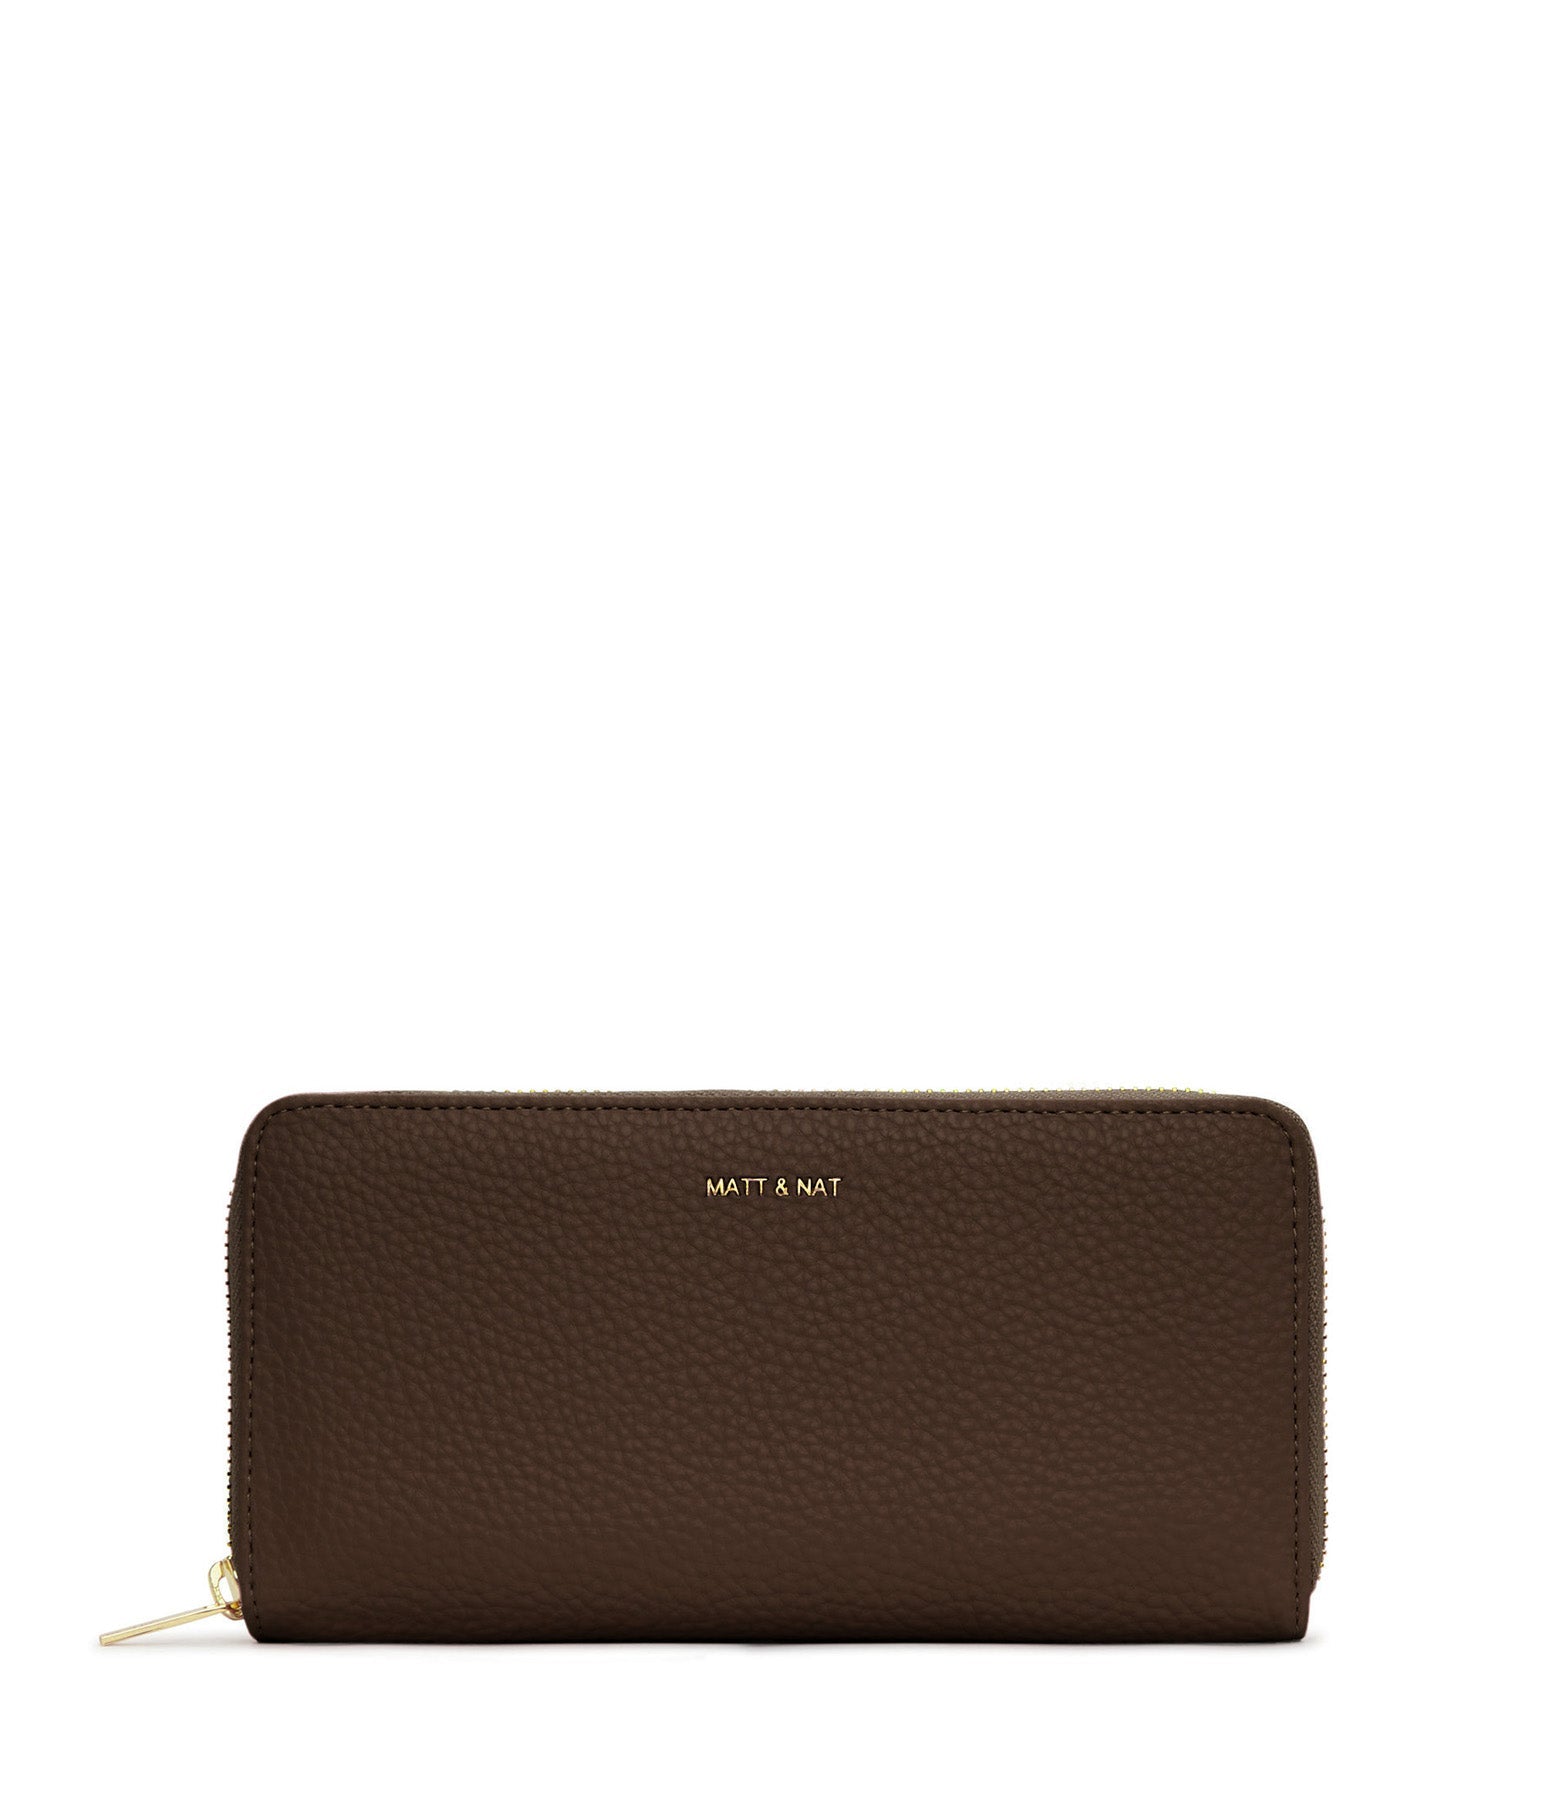 CENTRAL Vegan Wallet - Purity | Color: Brown - variant::chocolate